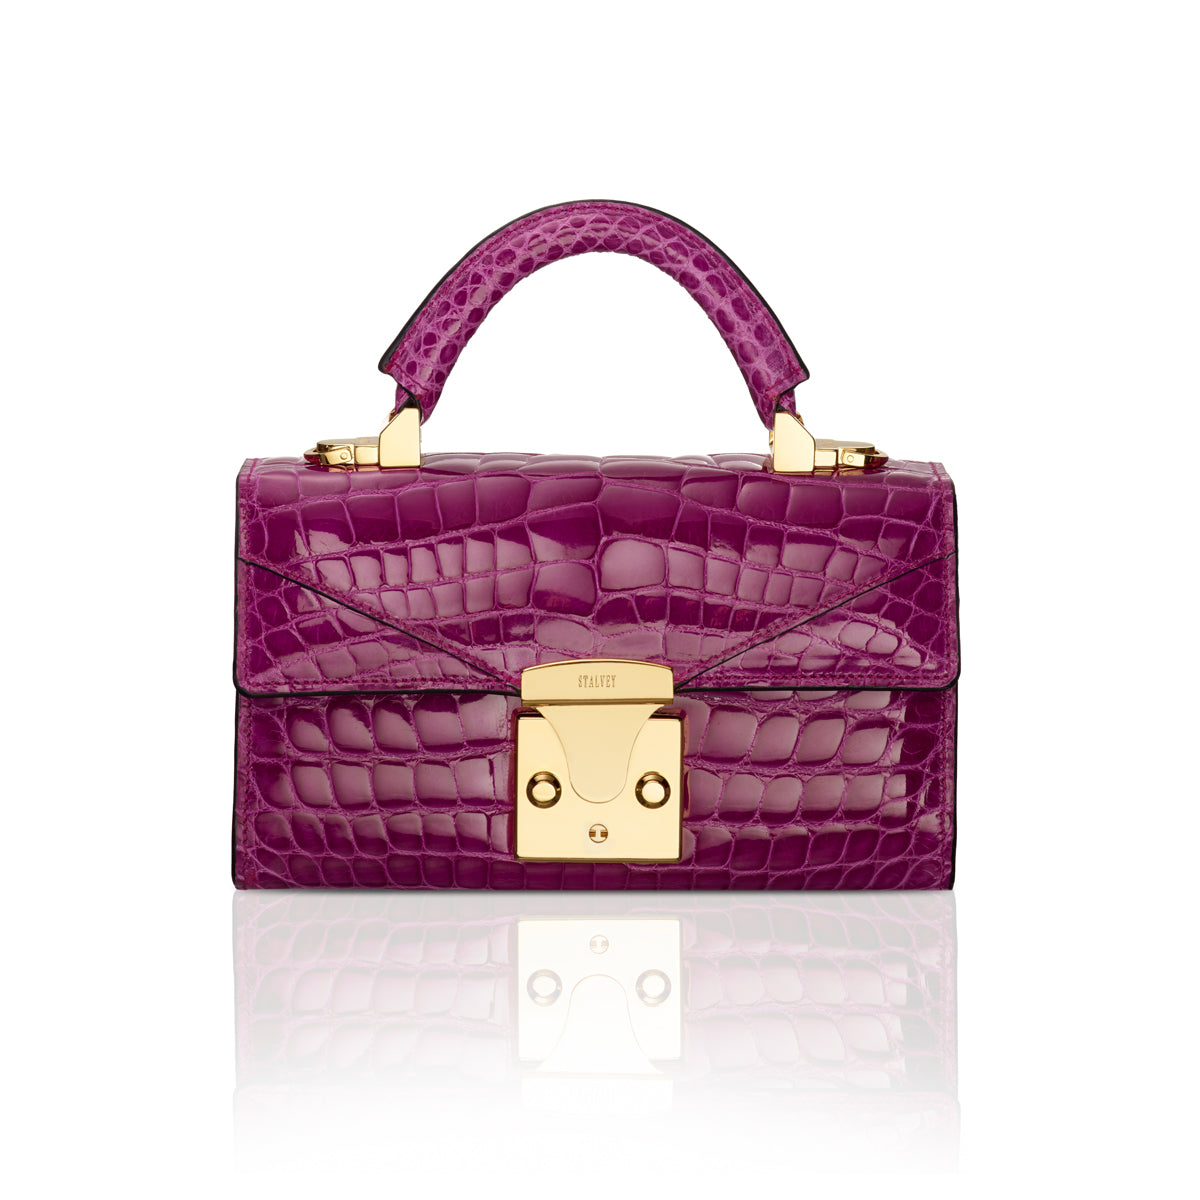 STALVEY Top Handle 2.0 Mini in Magenta Alligator with 24kt Gold Hardware Front View